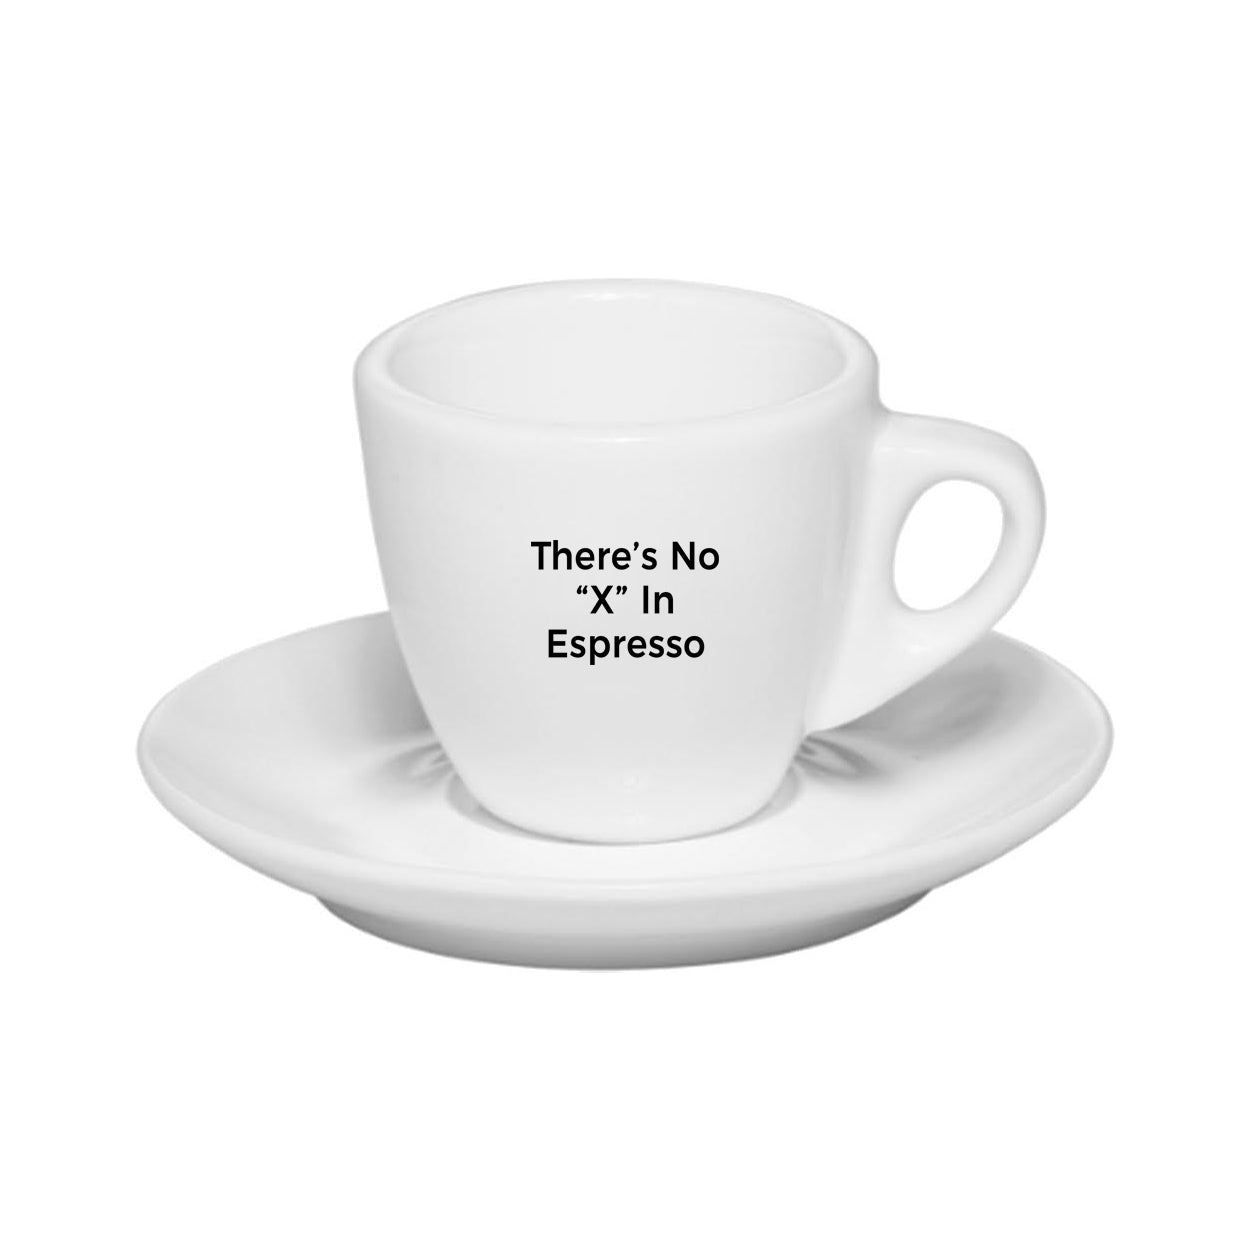 Theres No X In Espresso Funny Italian Espresso Cup With Saucer